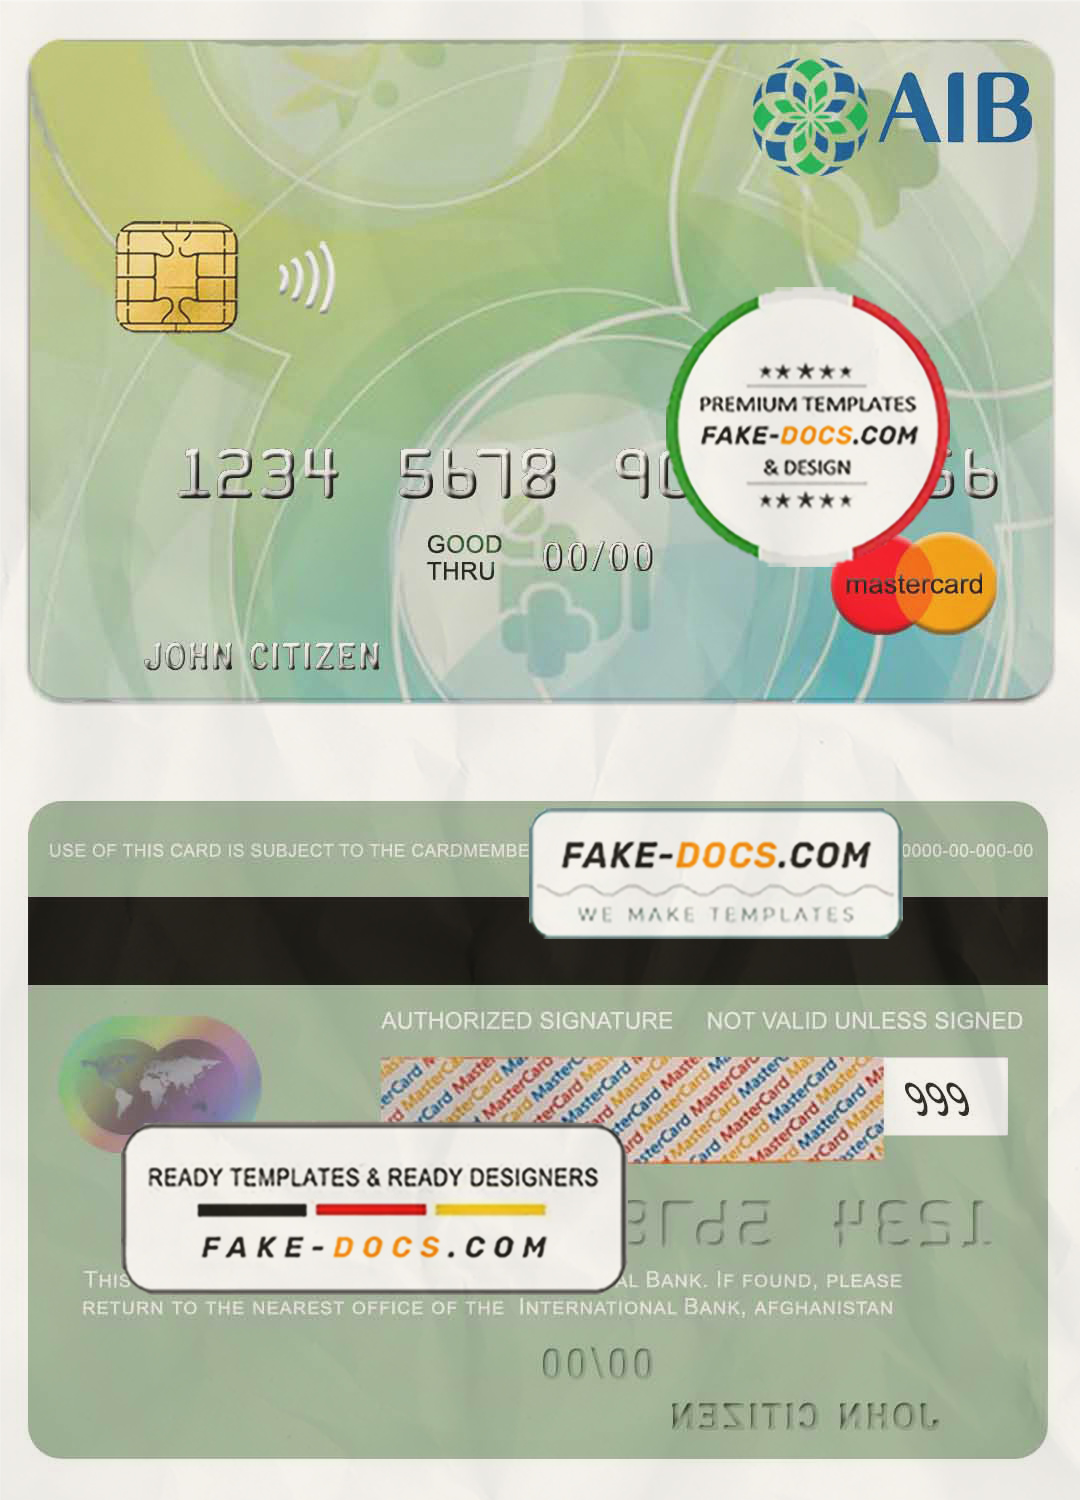 Afghanistan International Bank mastercard template in PSD format, fully editable scan